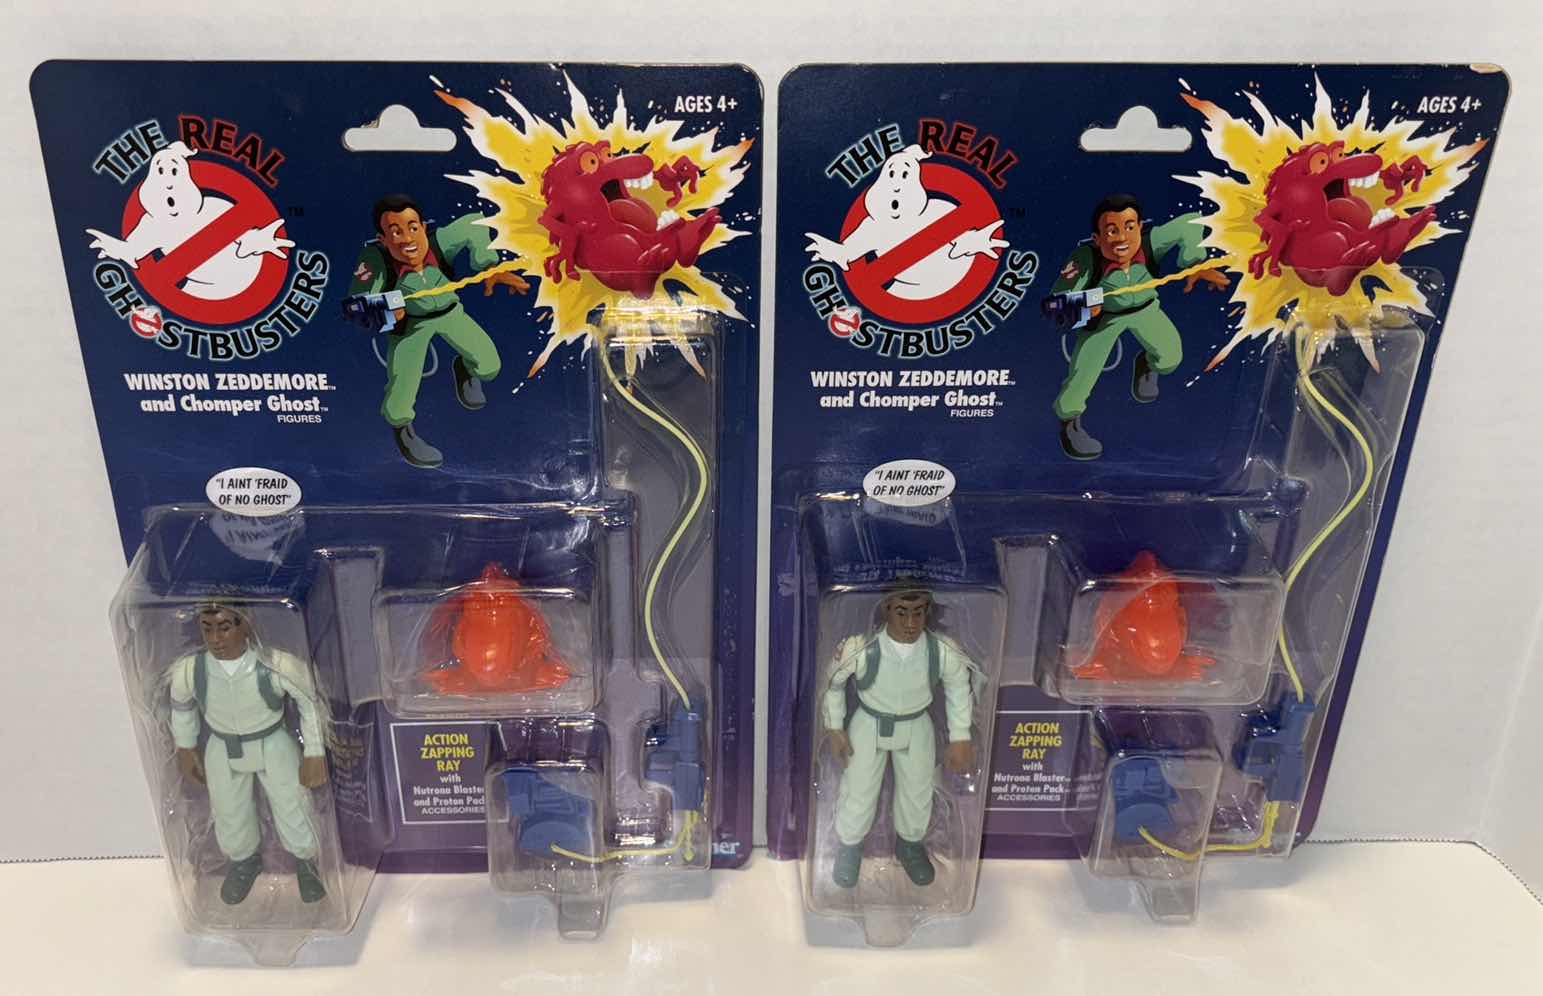 Photo 4 of NEW HASBRO KENNER THE REAL GHOSTBUSTERS ACTION FIGURE & ACCESSORIES 3-PACK, “PETER VENKMAN & GRABBER GHOST”, “WINSTON ZEDDEMORE & CHOMPER GHOST” x 2